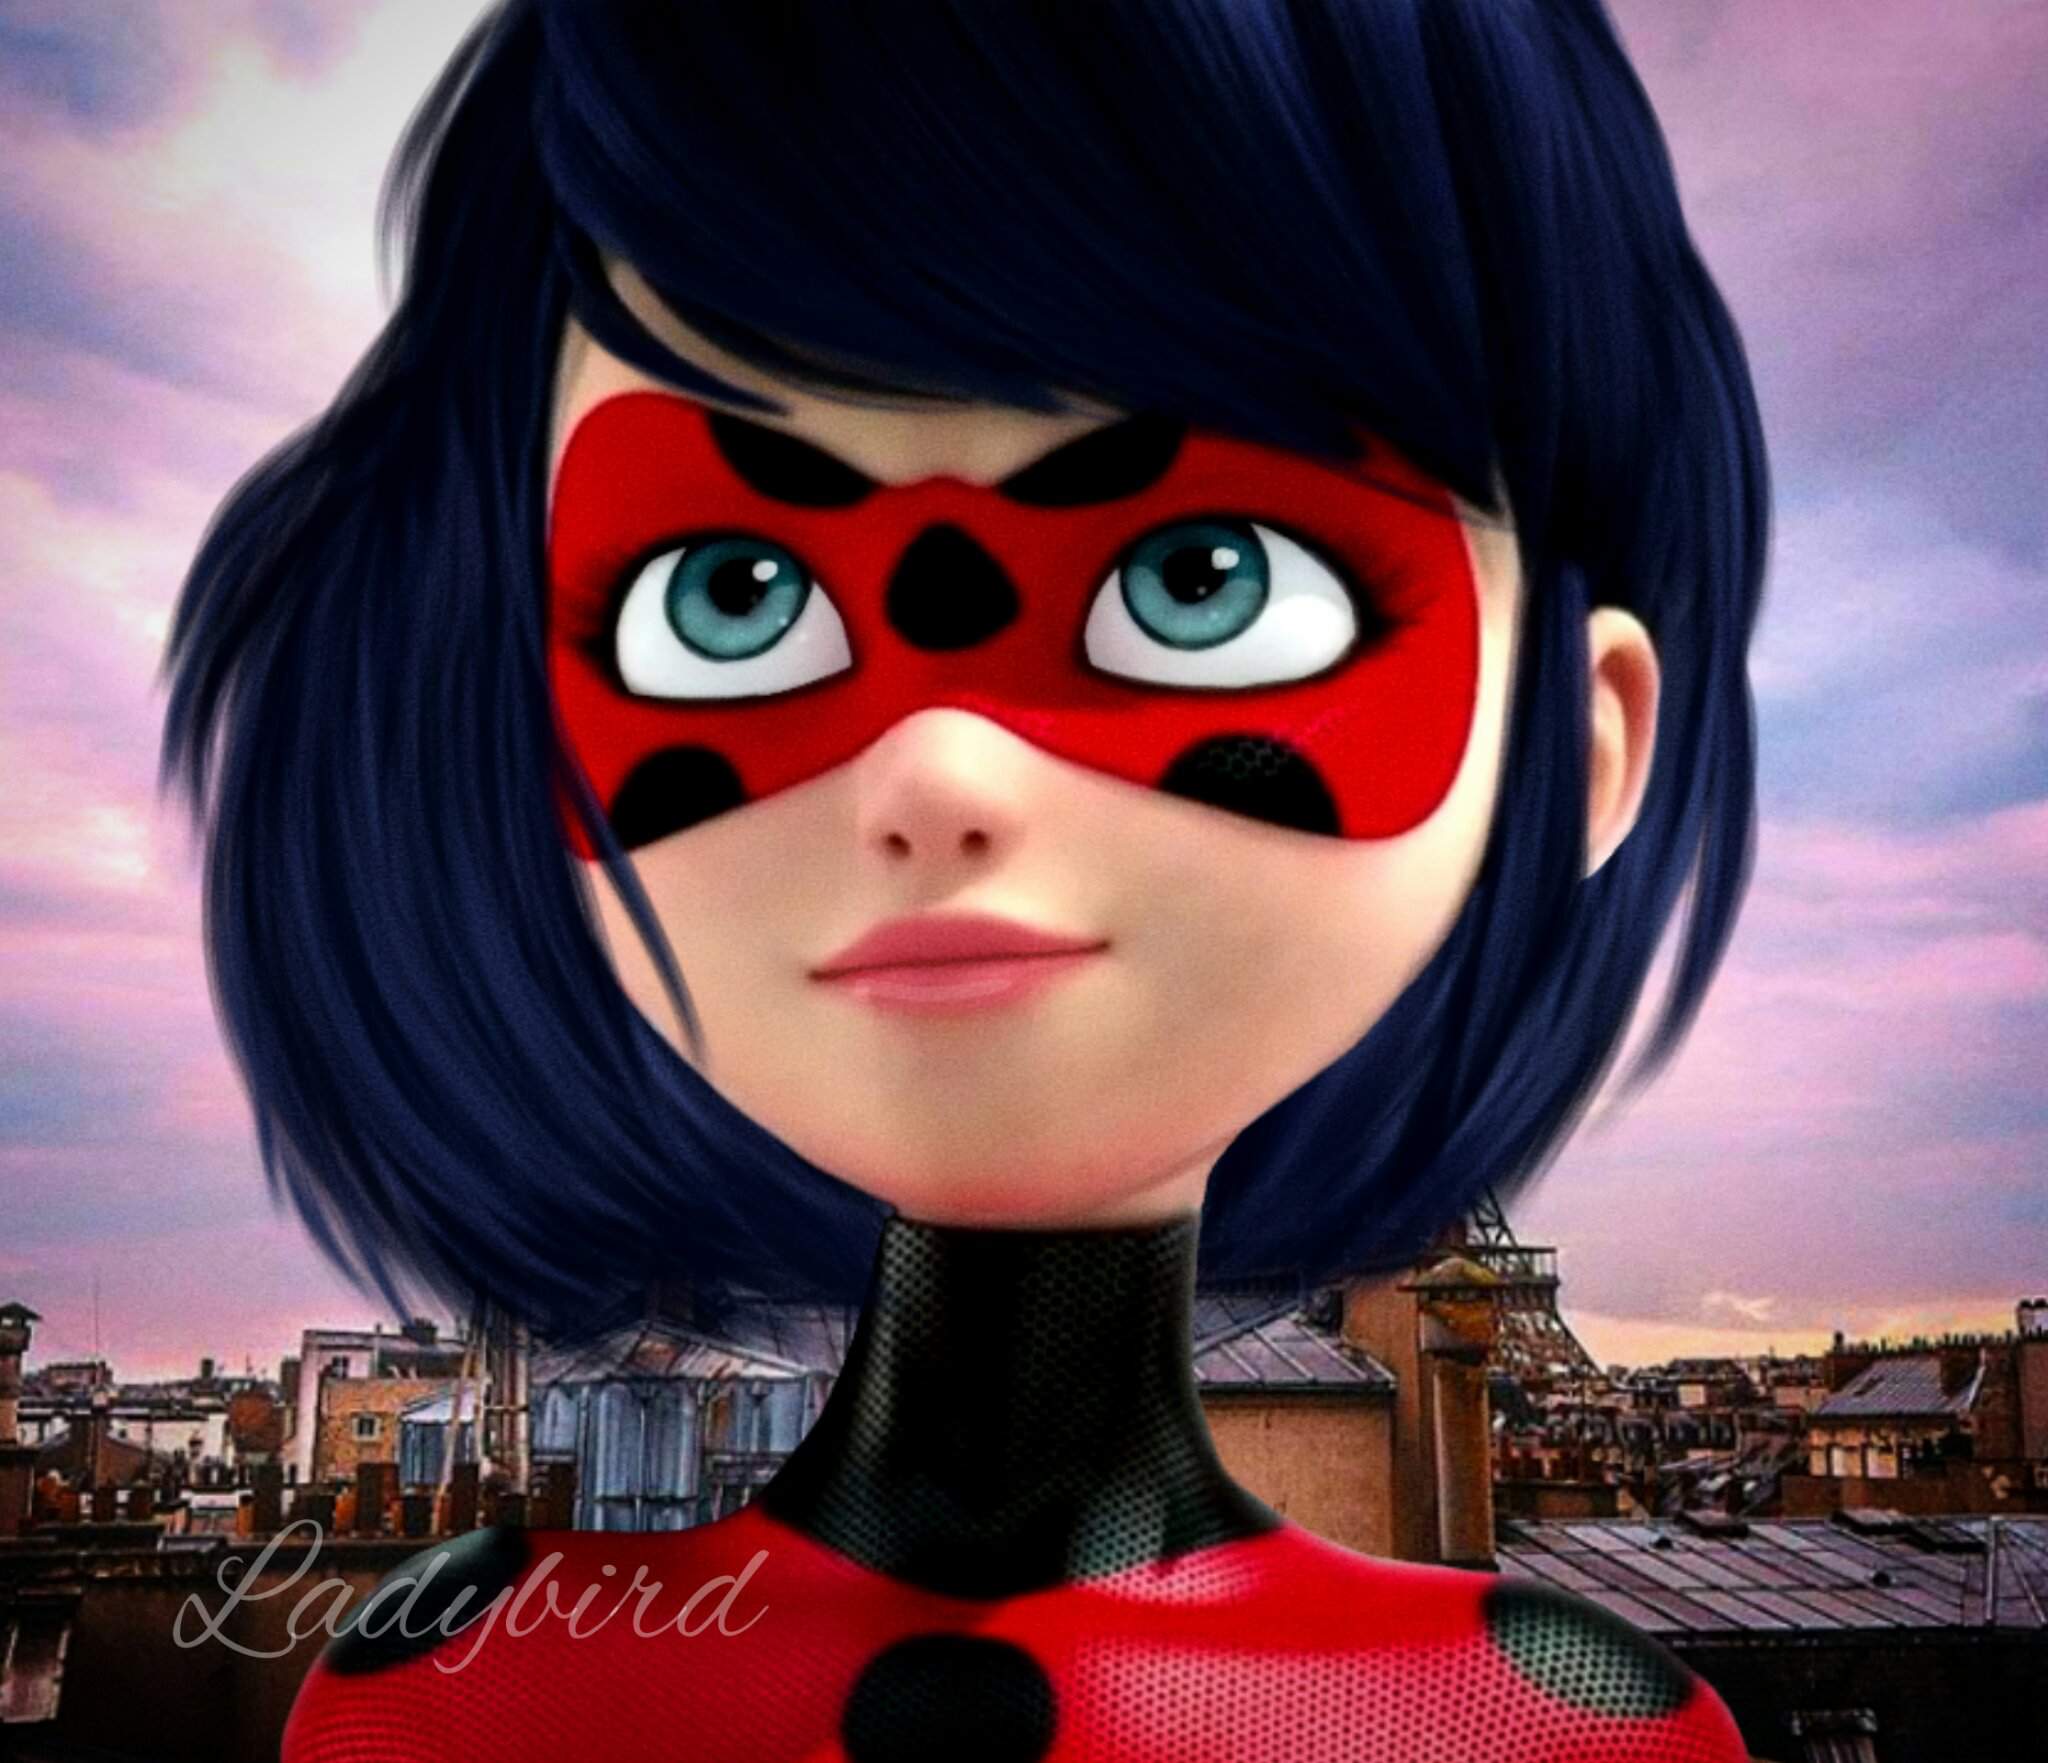 Ladybug with hair down Edit by Ladybird Miraculous Amino.